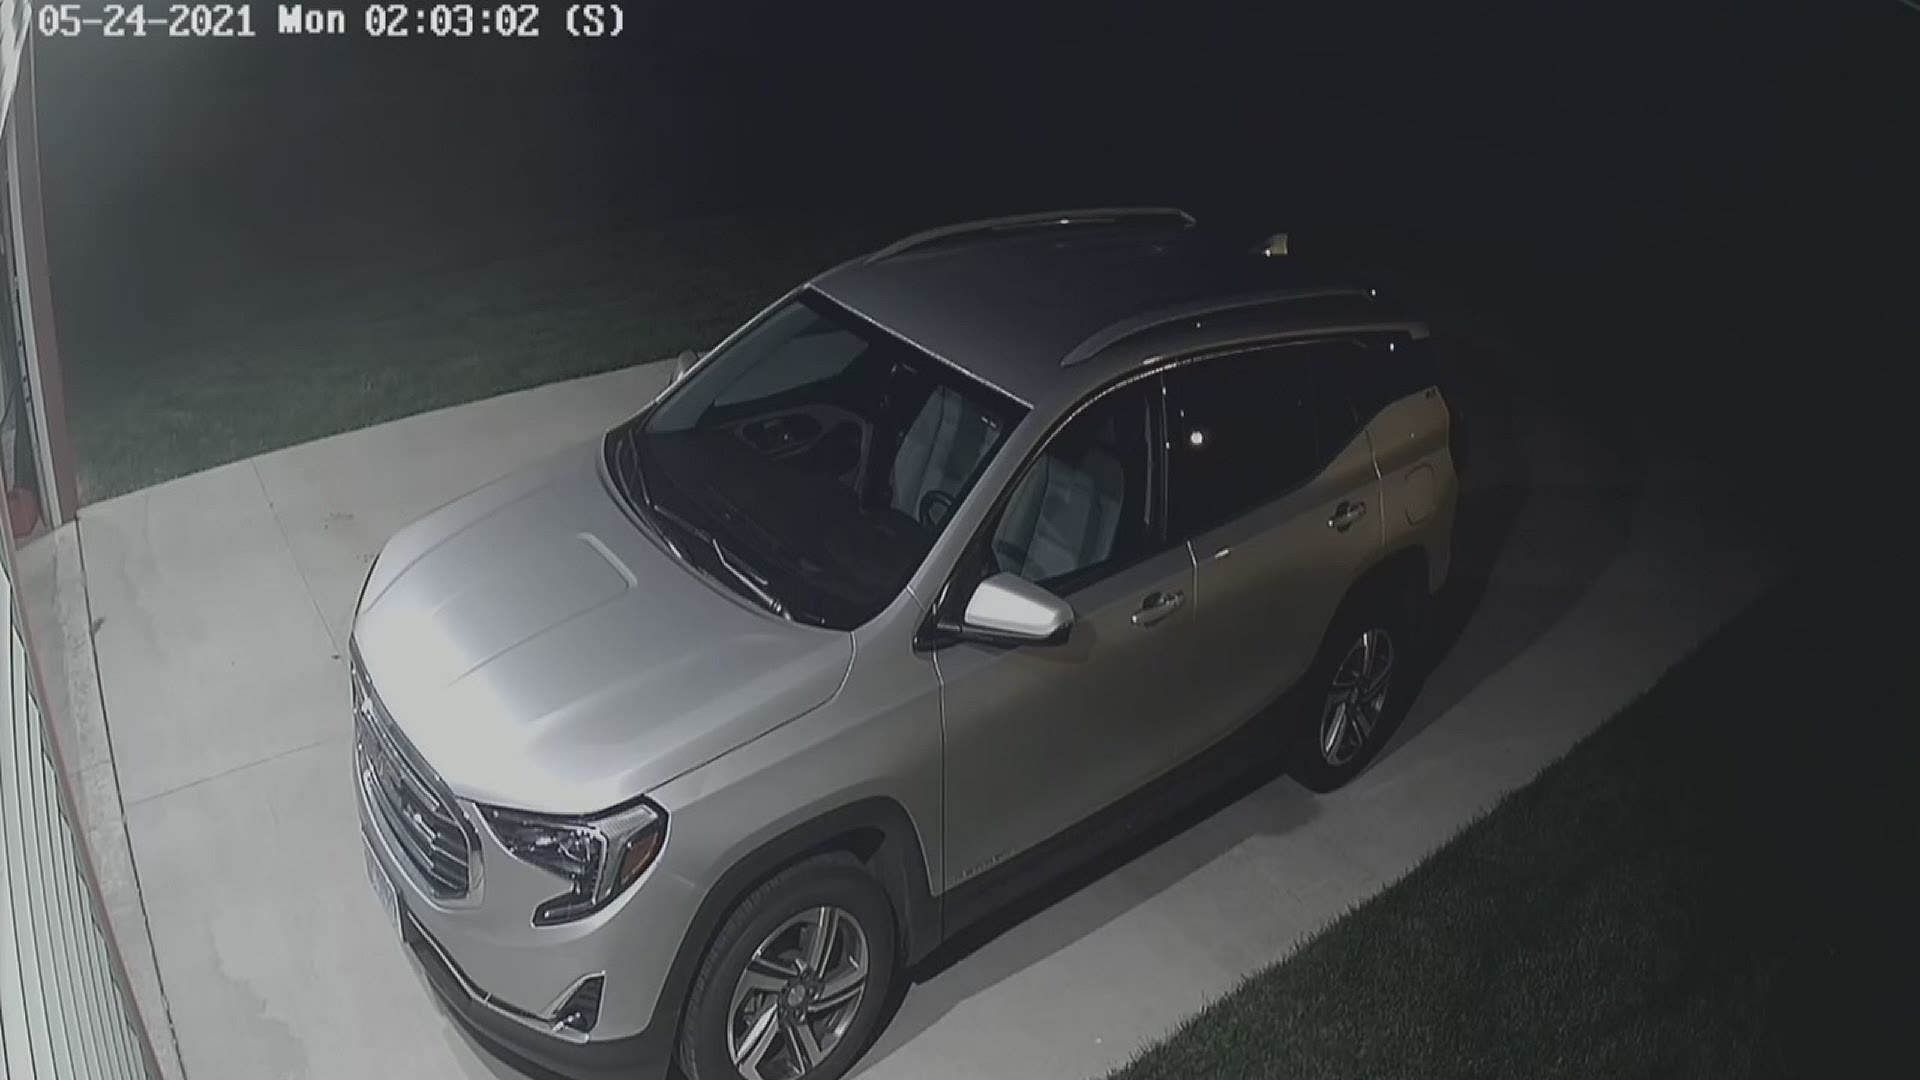 Jeff and Connie Smith admit they made a mistake, not checking their garage door before going to bed. Early Monday, two cars were stolen from their garage.